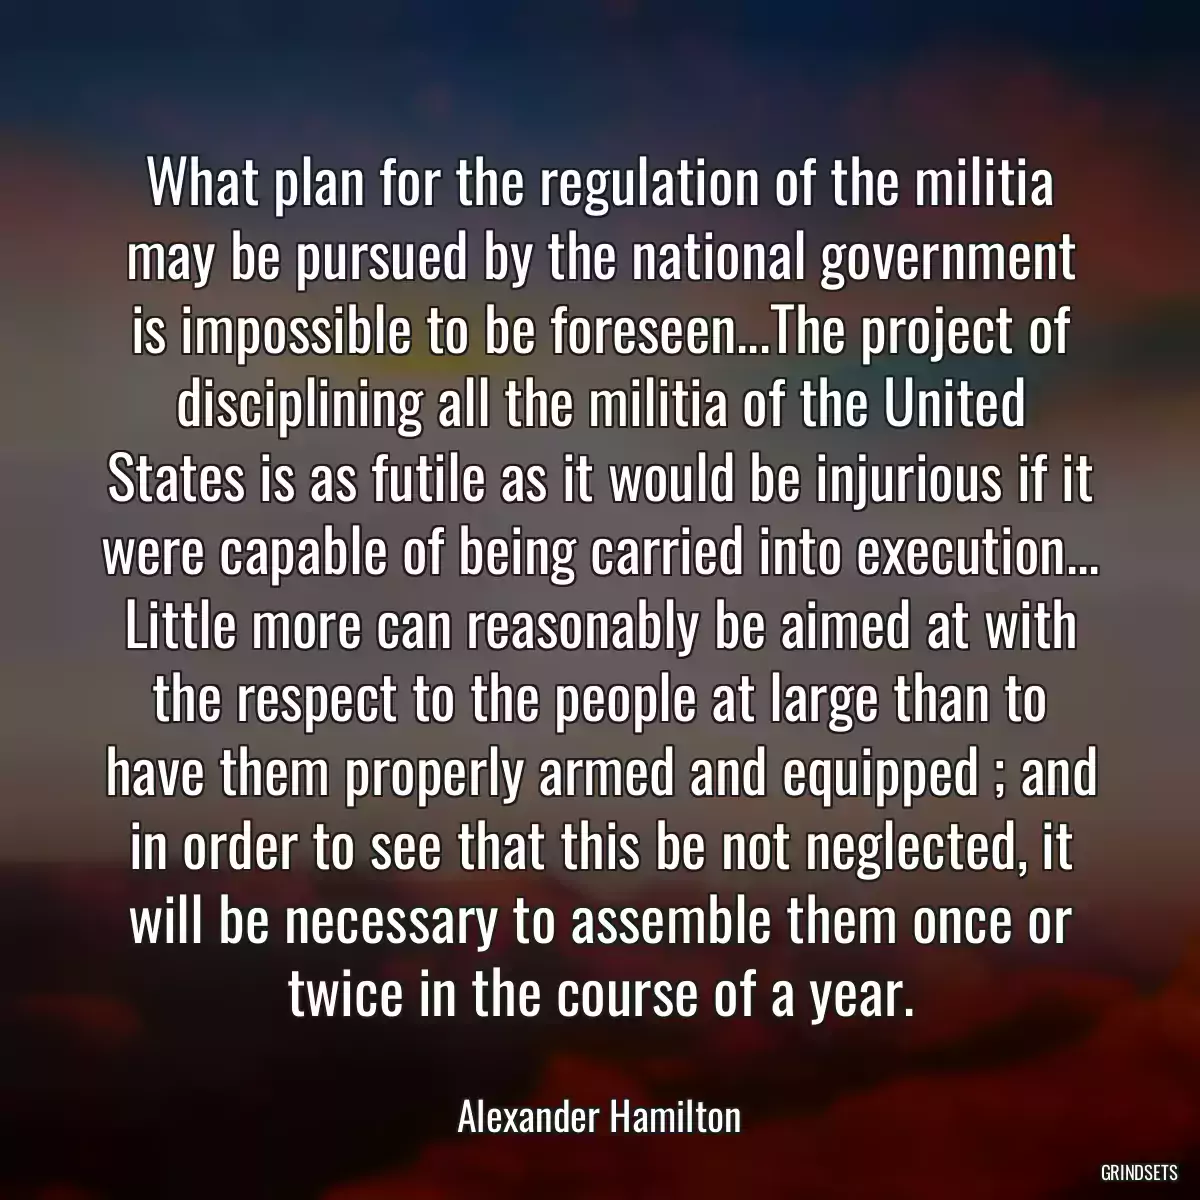 What plan for the regulation of the militia may be pursued by the national government is impossible to be foreseen...The project of disciplining all the militia of the United States is as futile as it would be injurious if it were capable of being carried into execution... Little more can reasonably be aimed at with the respect to the people at large than to have them properly armed and equipped ; and in order to see that this be not neglected, it will be necessary to assemble them once or twice in the course of a year.